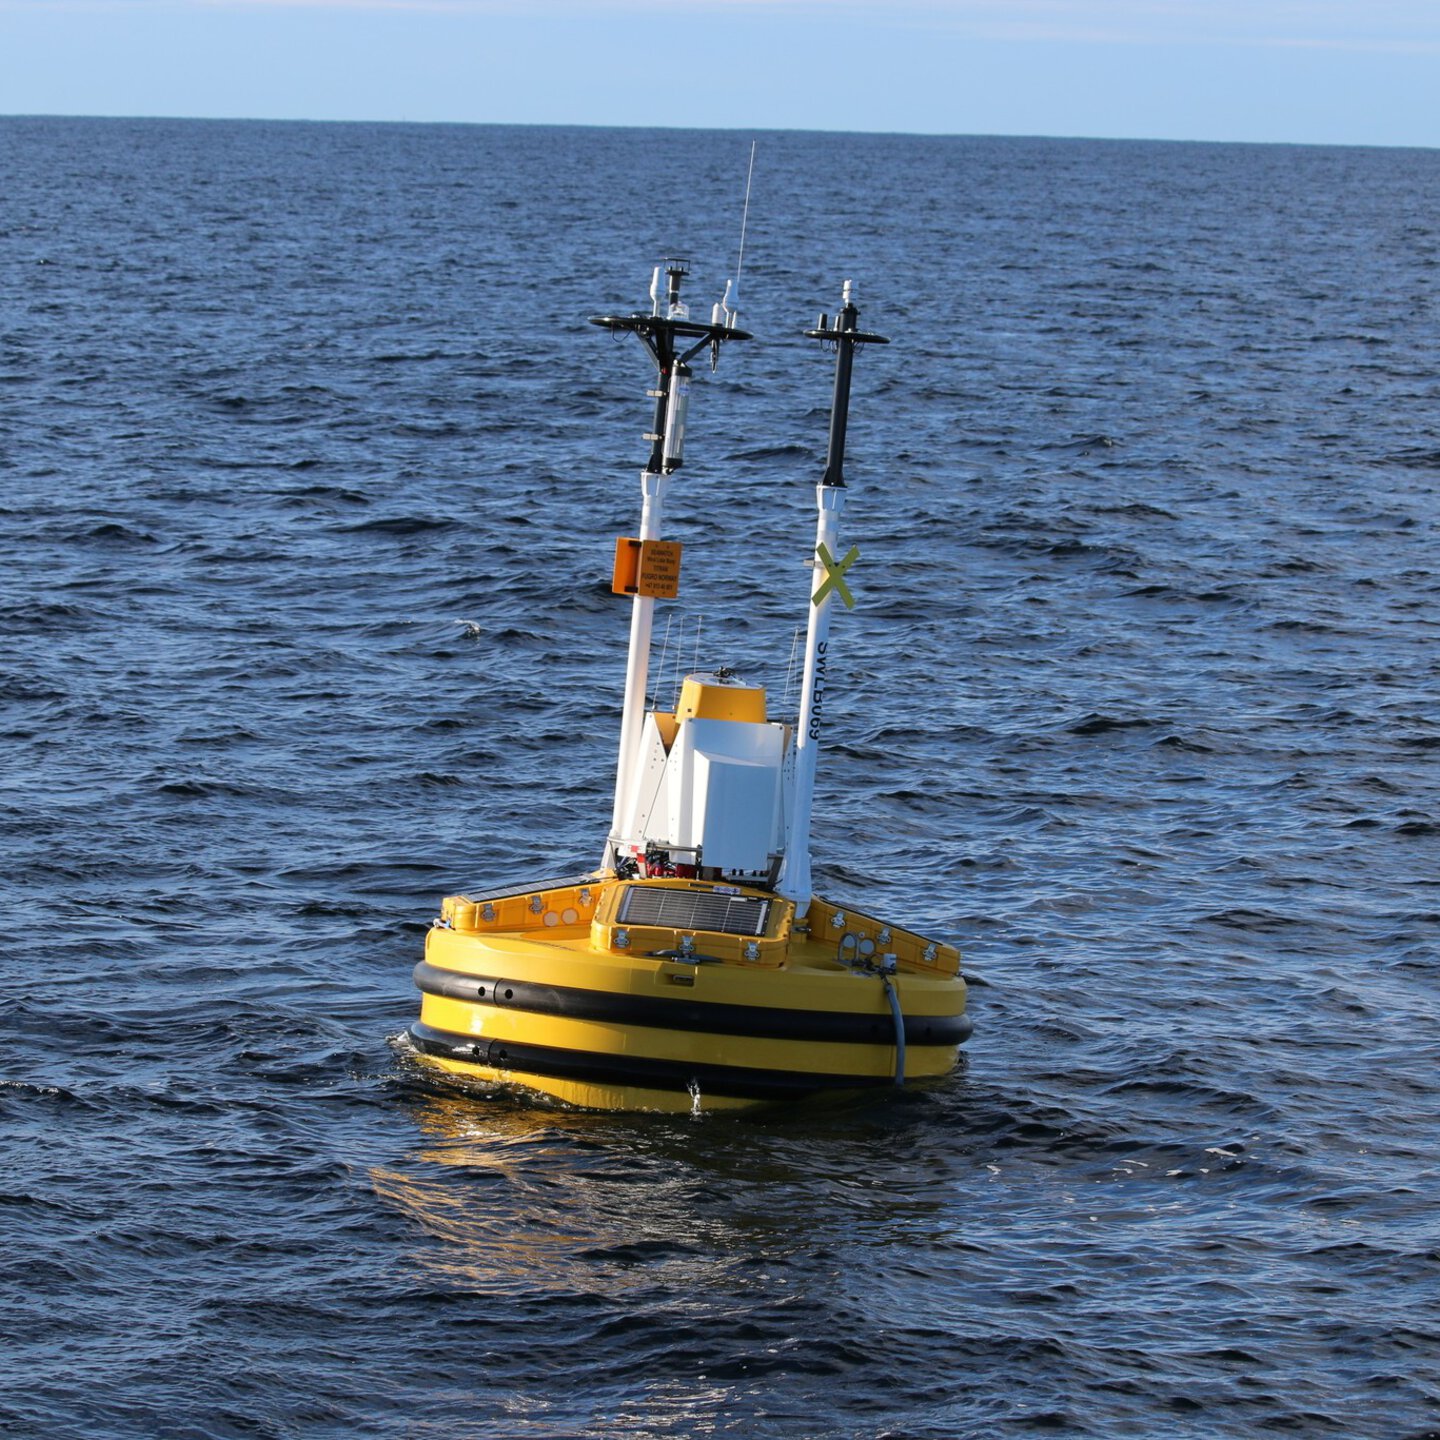 SWLB Operations Titran
Fugro, Seawatch Wind Lidar Buoy, Offshore Wind
Seawatch Buoy waiting to be deployed